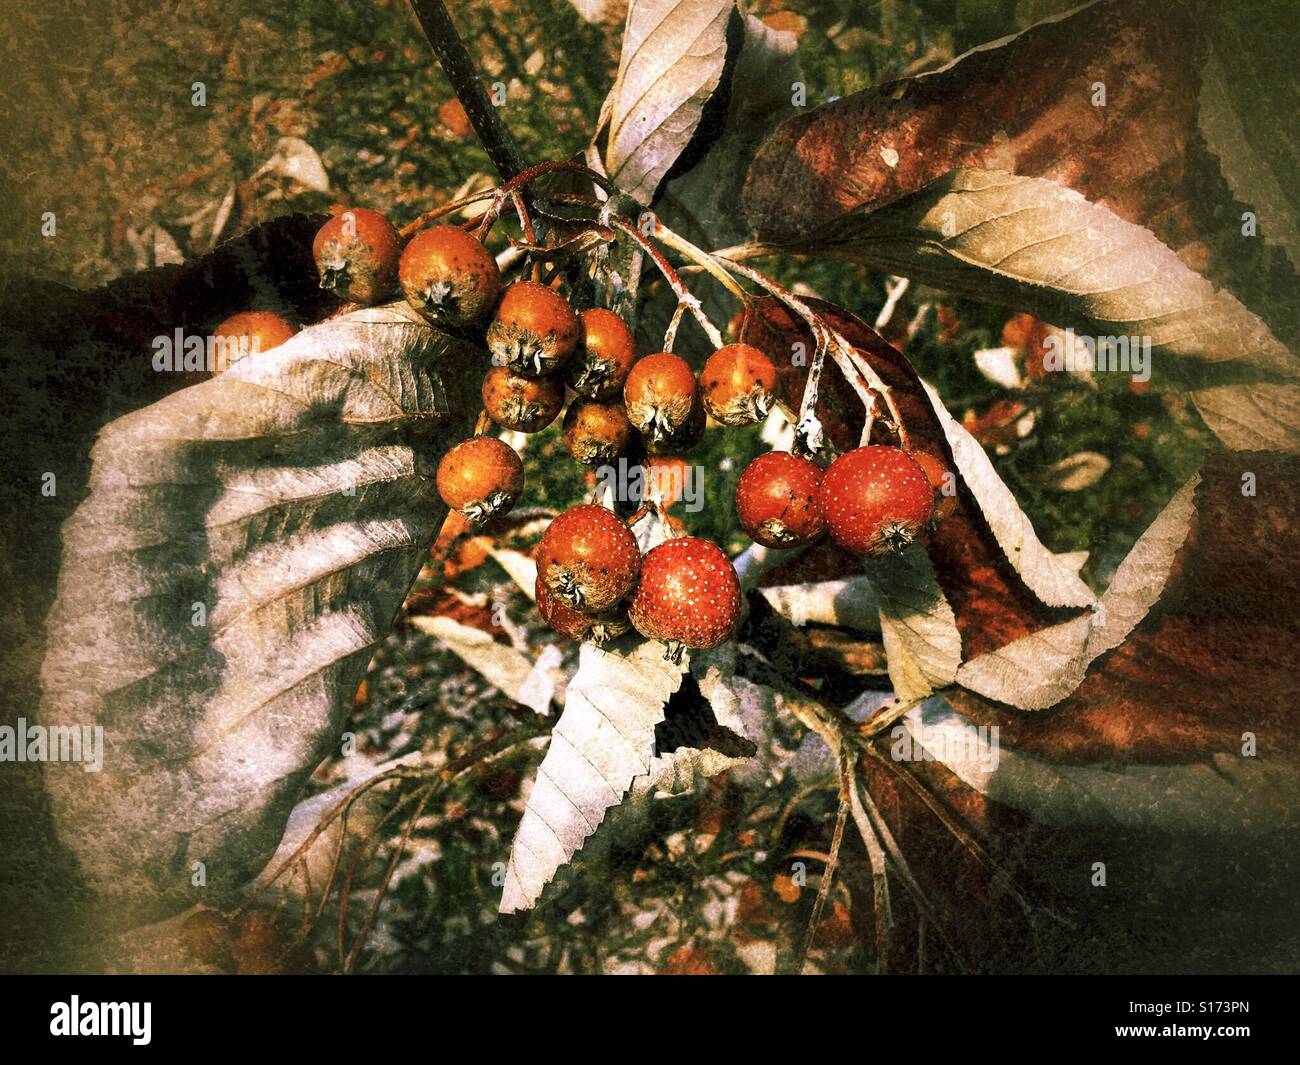 Late autumn fruit and withered brown leaves Stock Photo